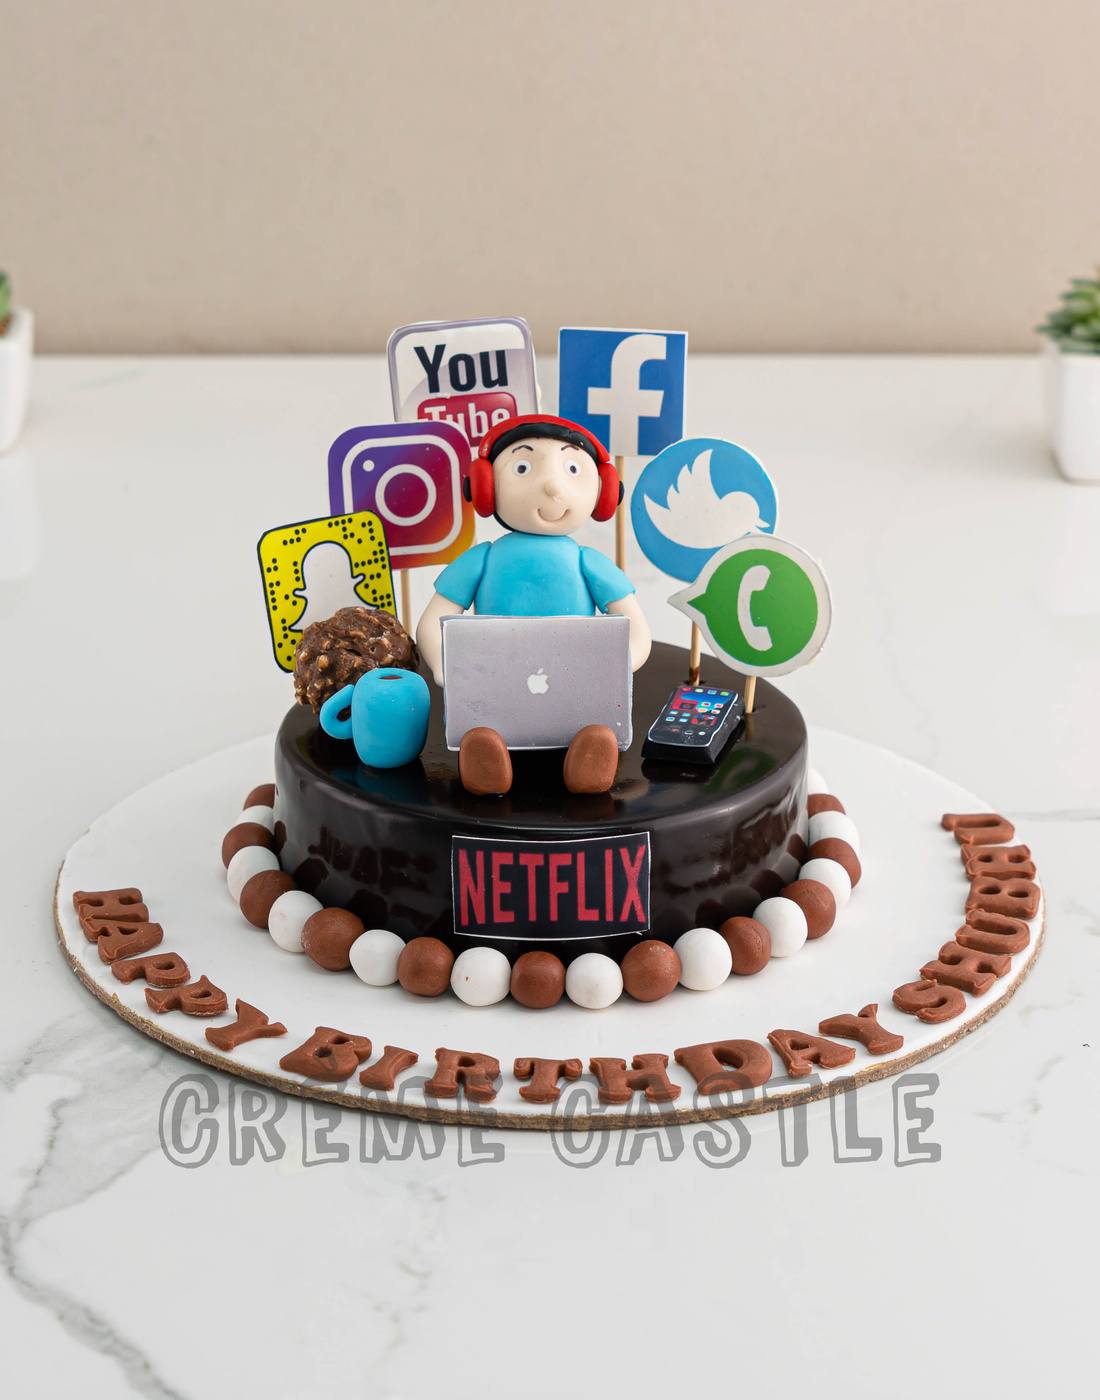 Netflix and popcorn | Hecho a mano cake design | Flickr